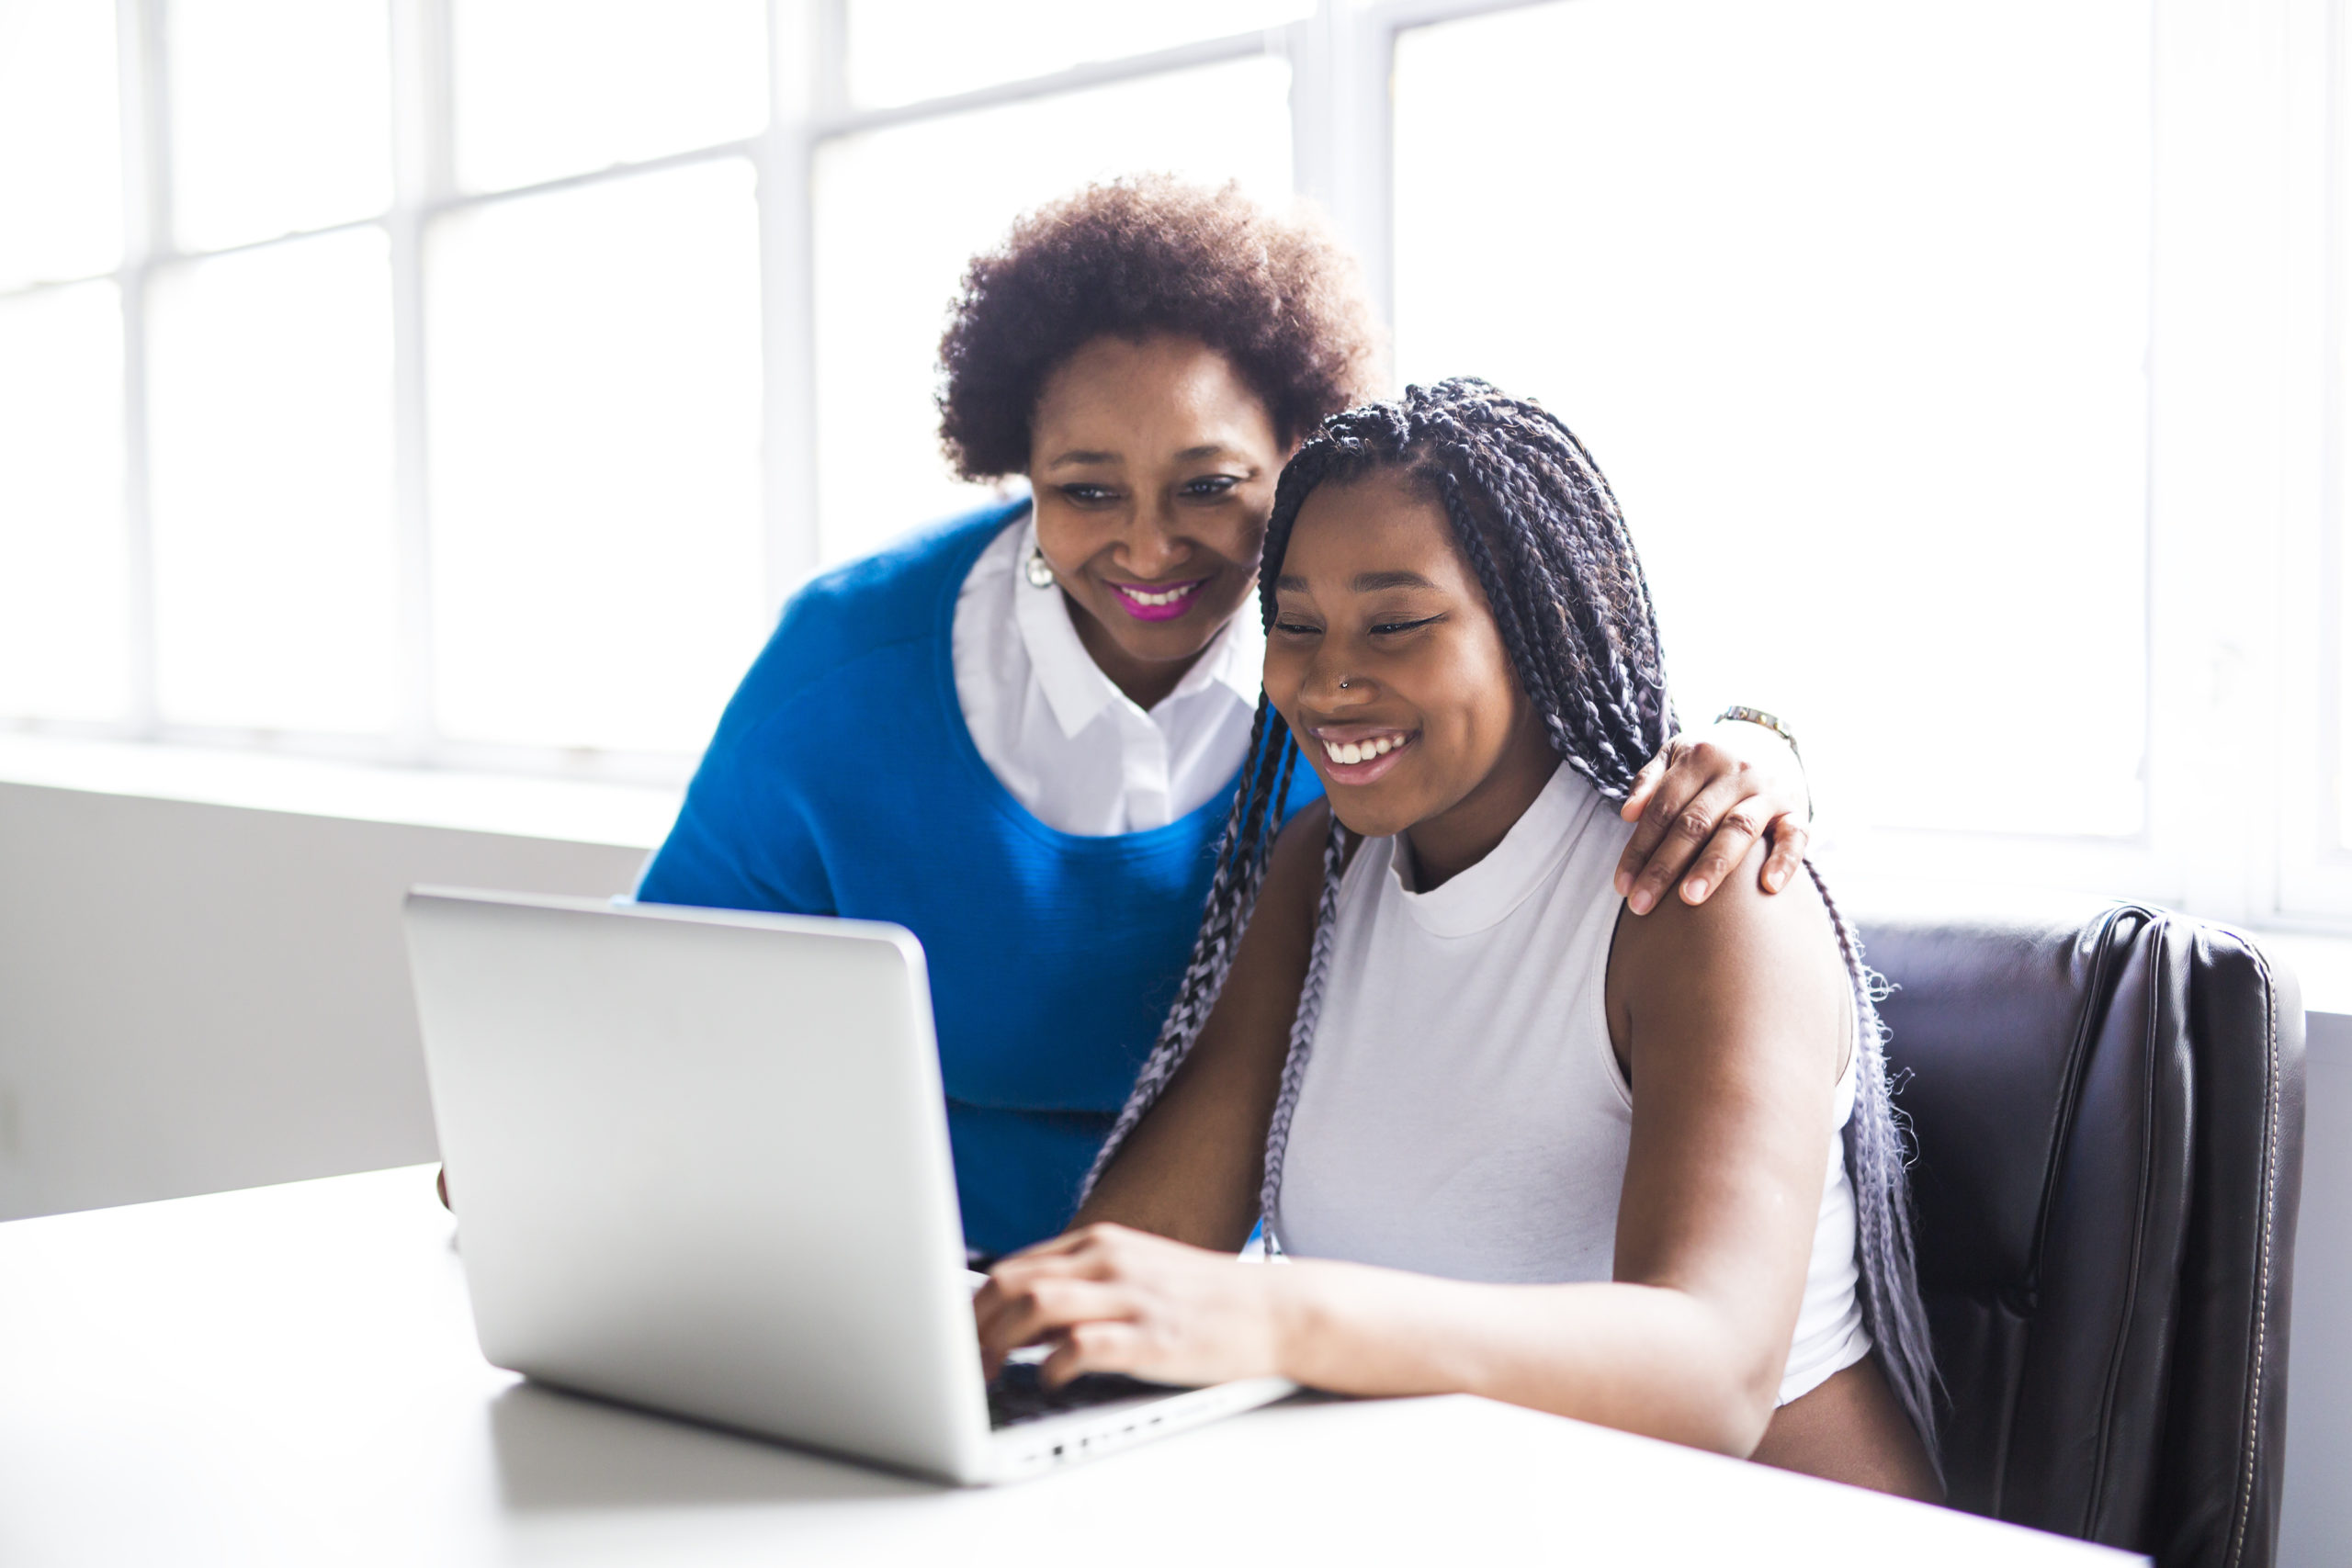 Image: A high school student and her mother preparing for a test. Learn the best online test taking strategies.